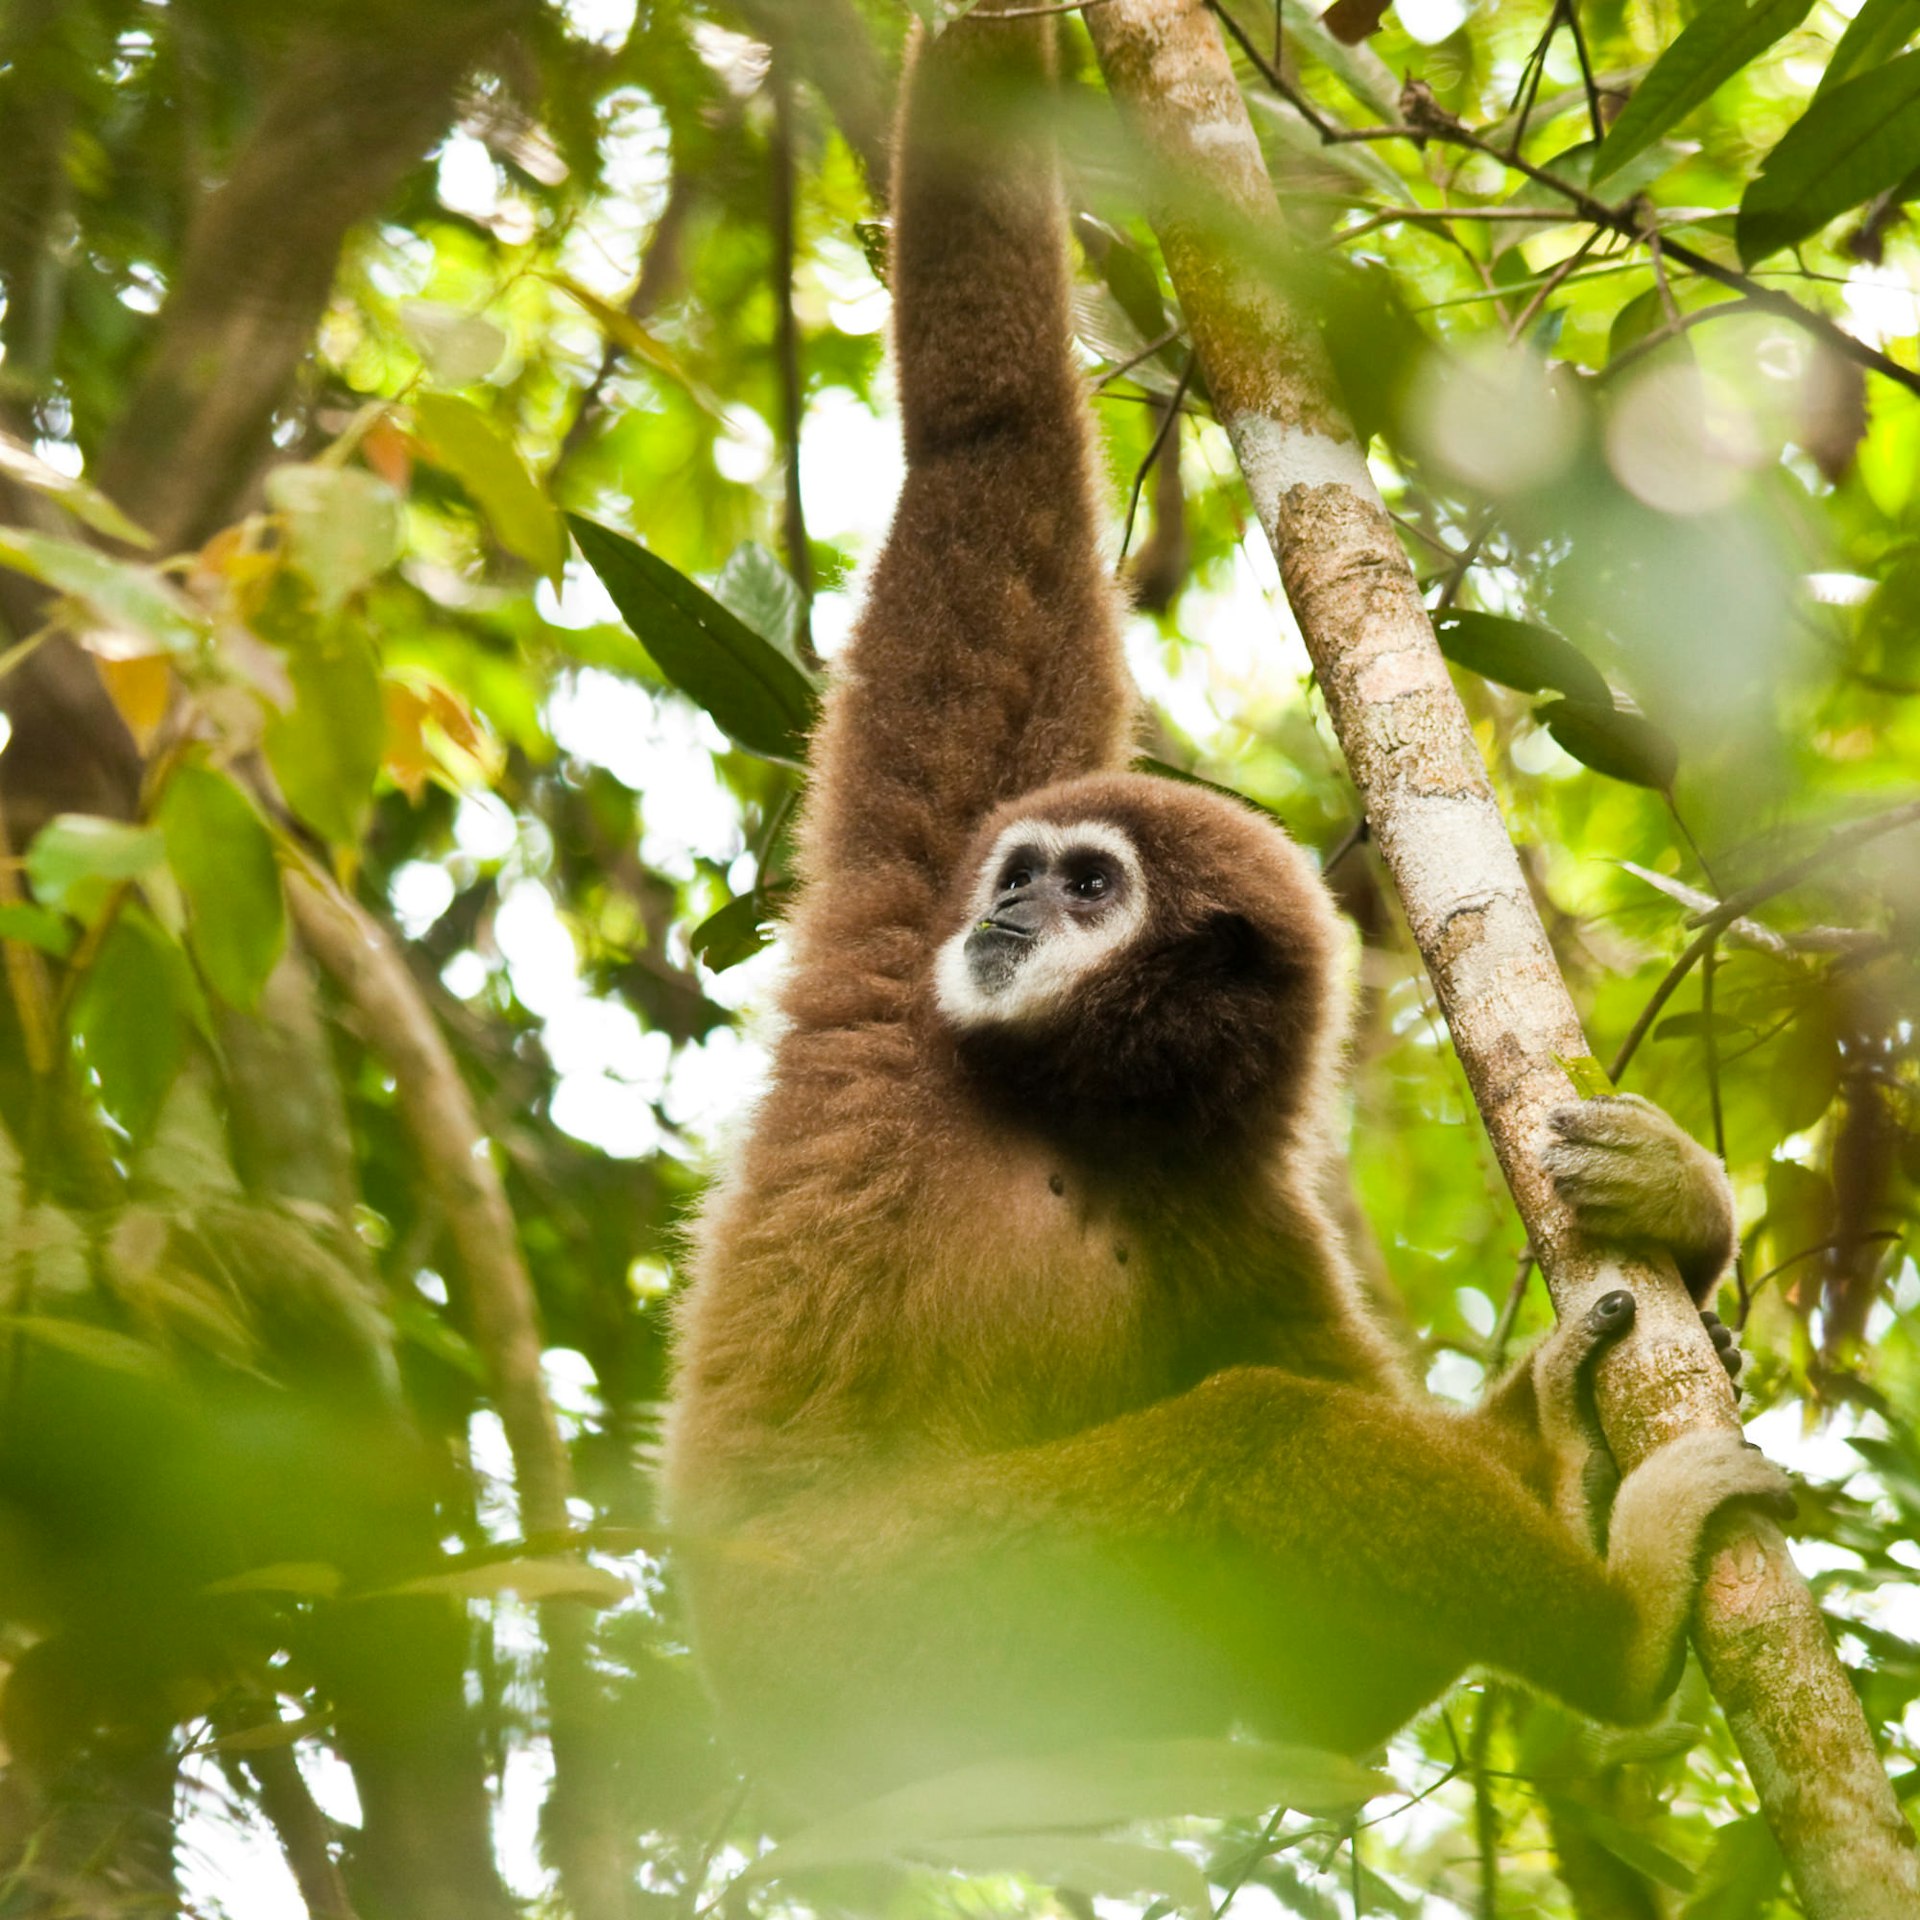 Male White-handed Gibbon eating leaves in the jungles of Thailand